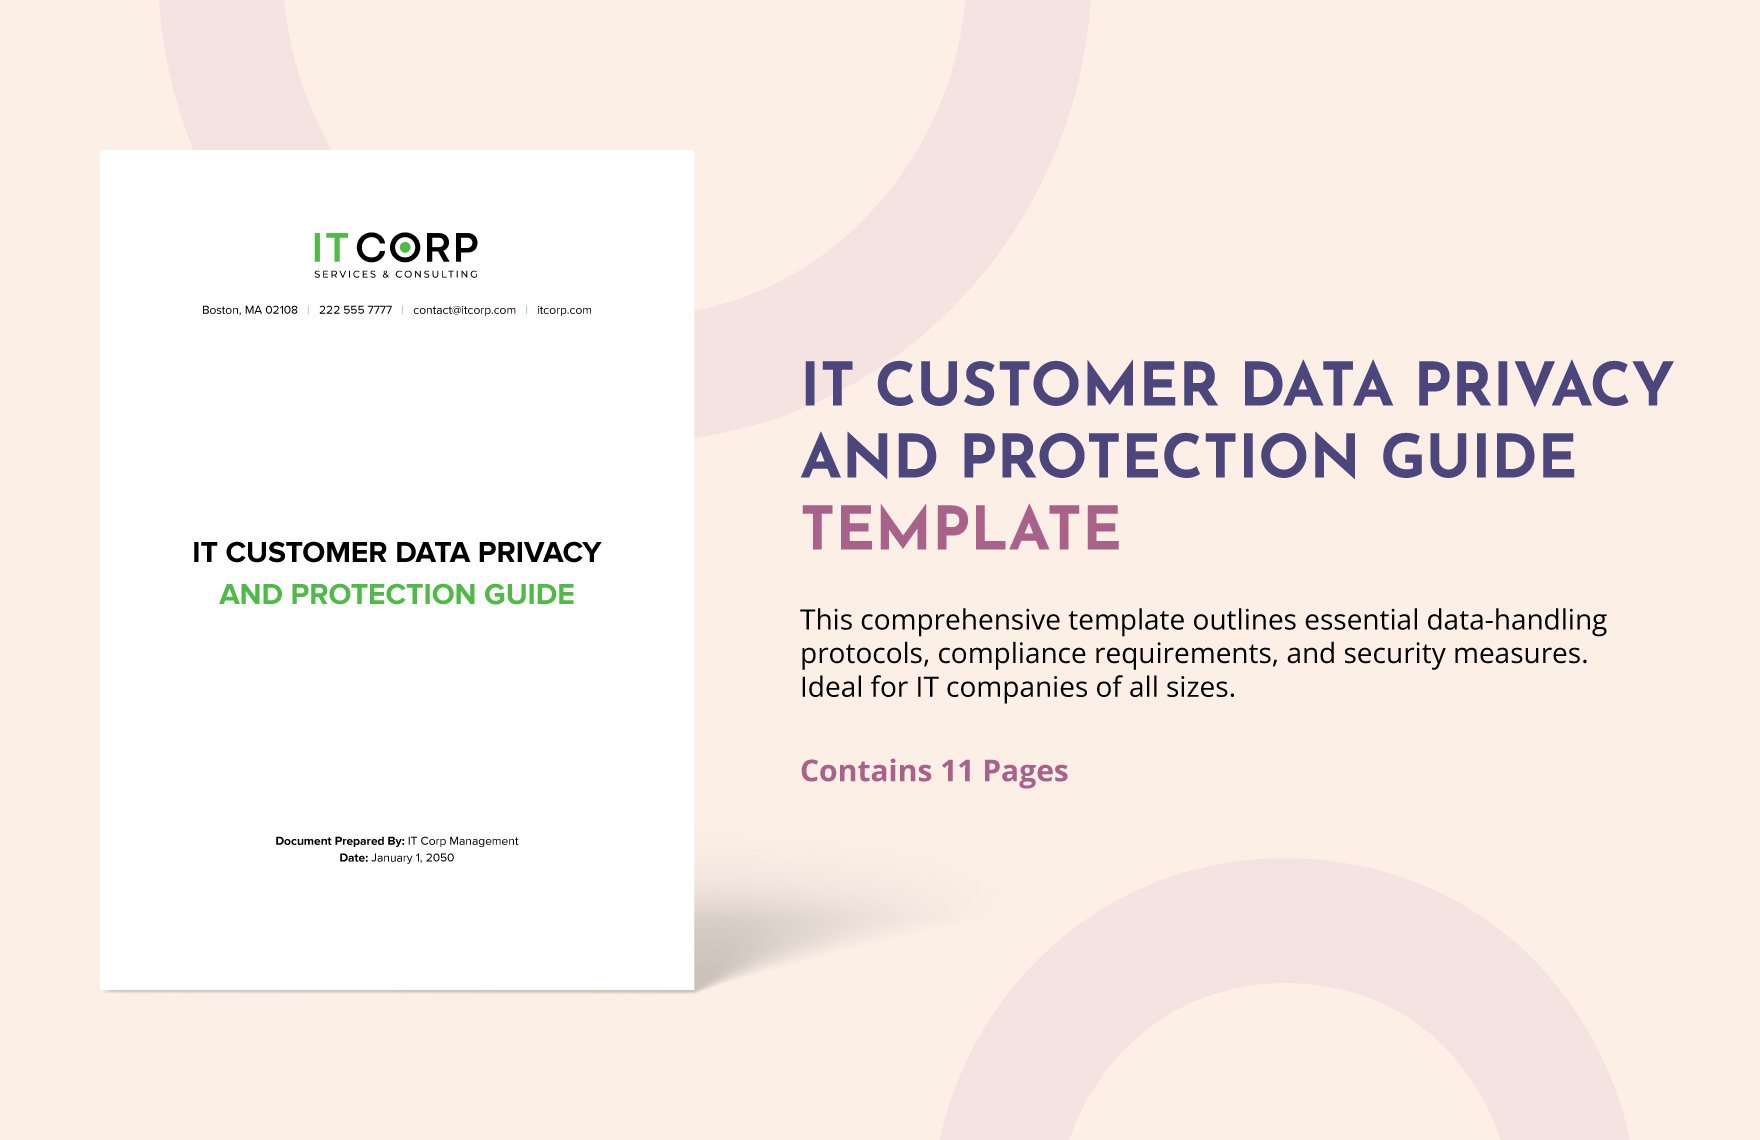 IT Customer Data Privacy and Protection Guide Template